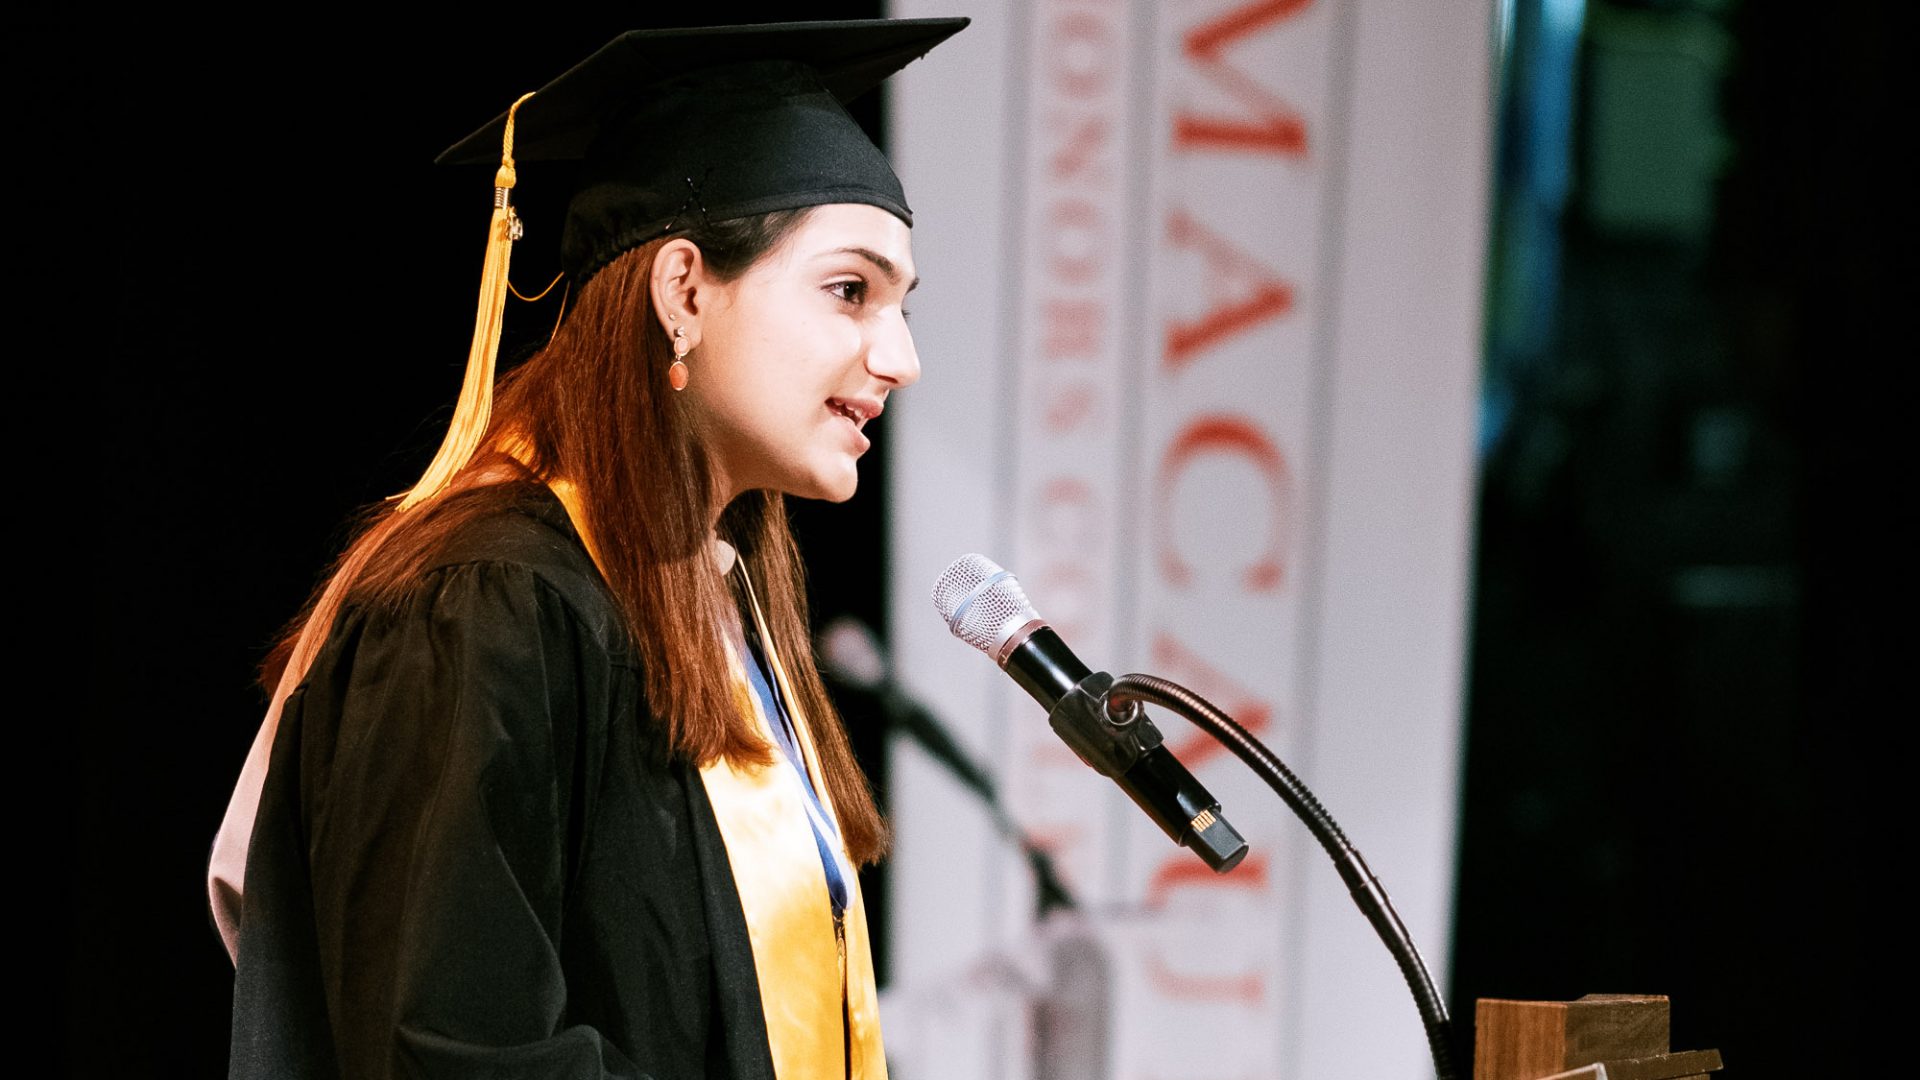 Vasiliki Savvides | Commencement Remarks from the Class of 2019